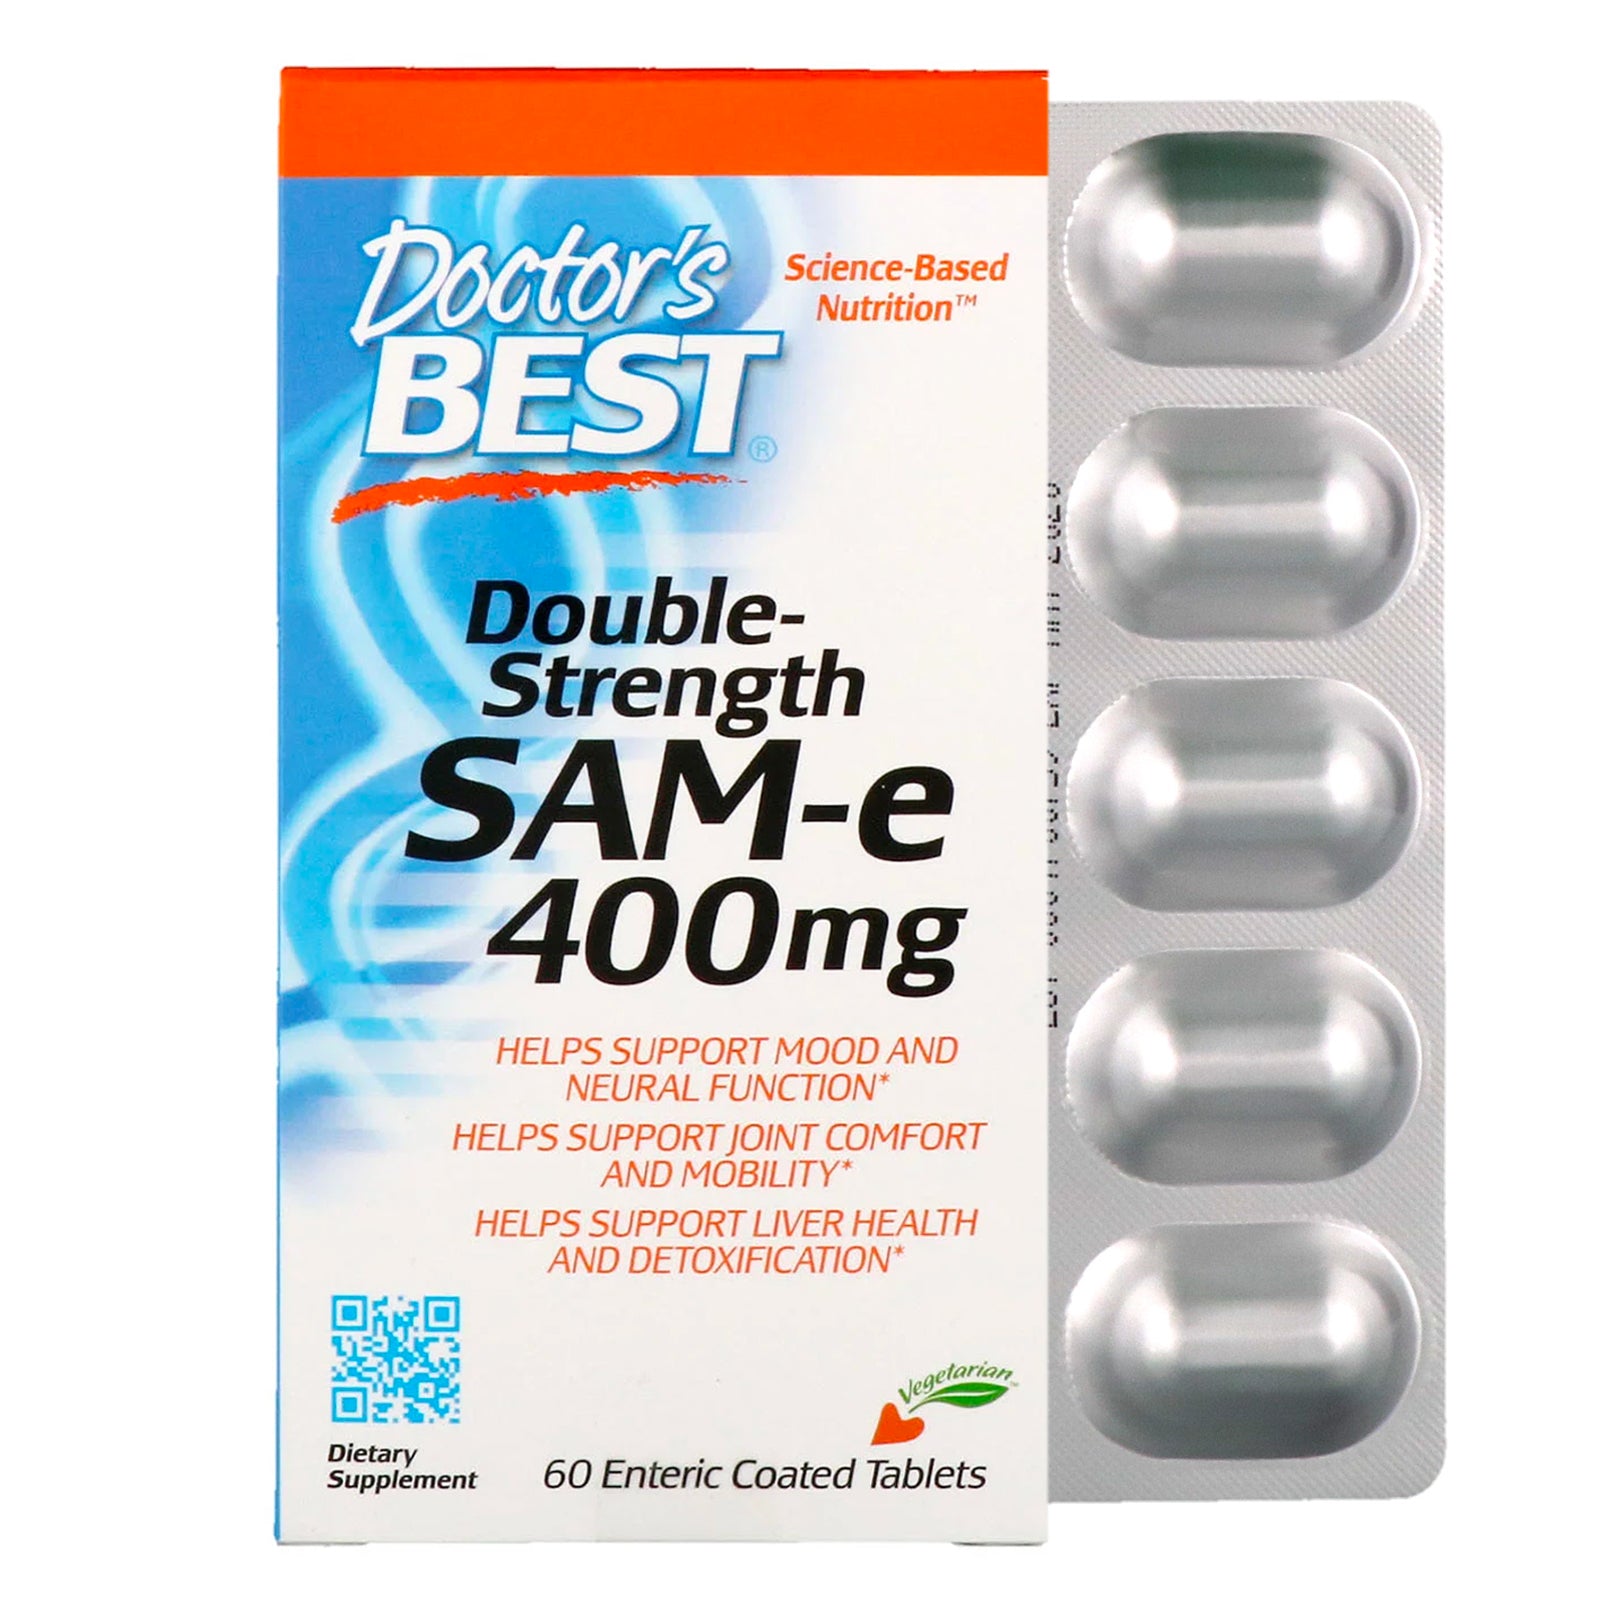 Doctor's Best, SAM-e, Double-Strength, 400 mg, 60 Enteric Coated Tablets